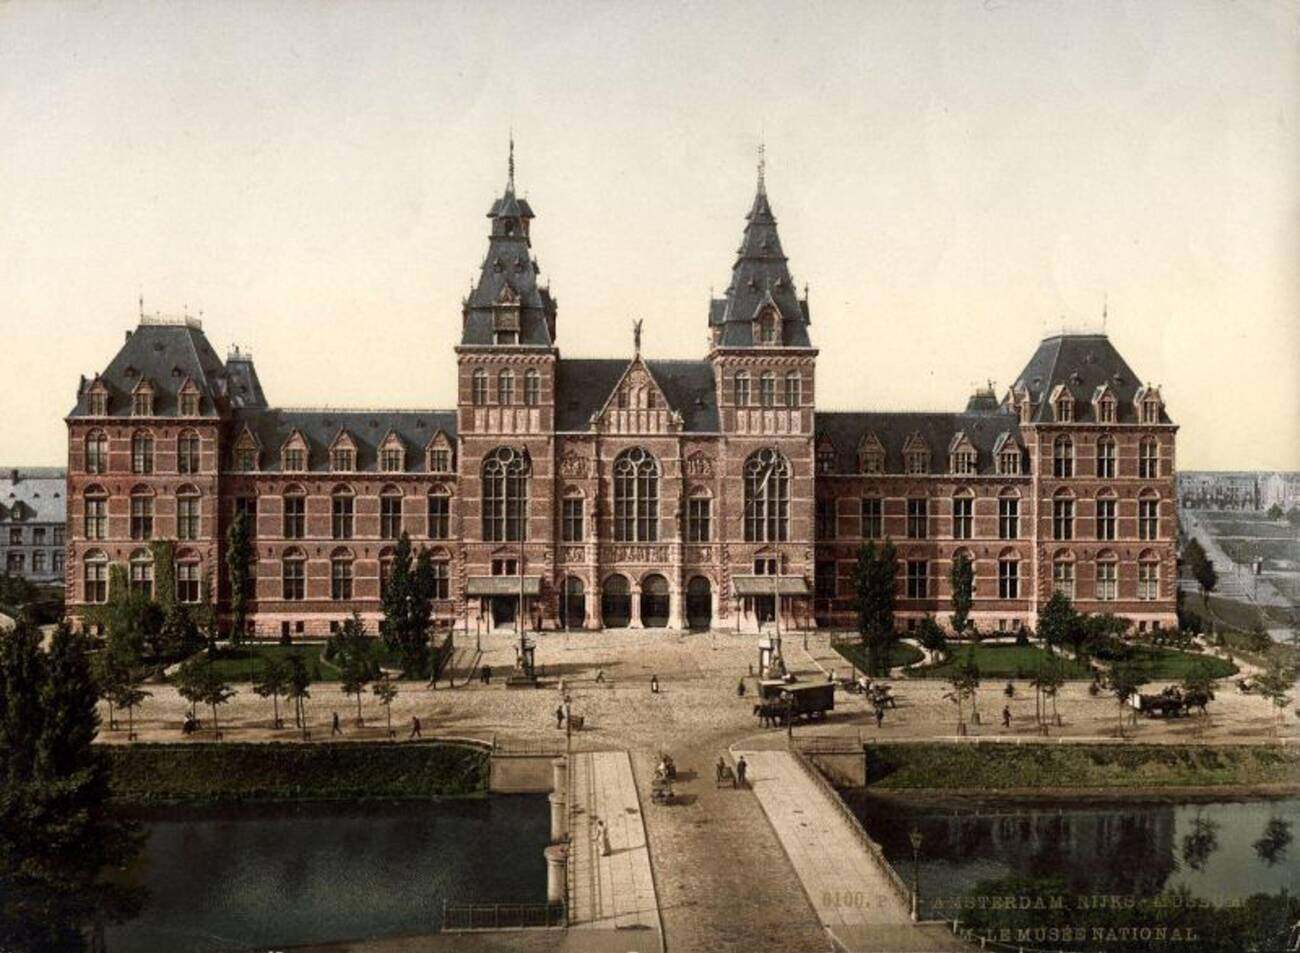 Museums, The Netherlands. Exterior of the Rijksmuseum in Amsterdam around 1900.